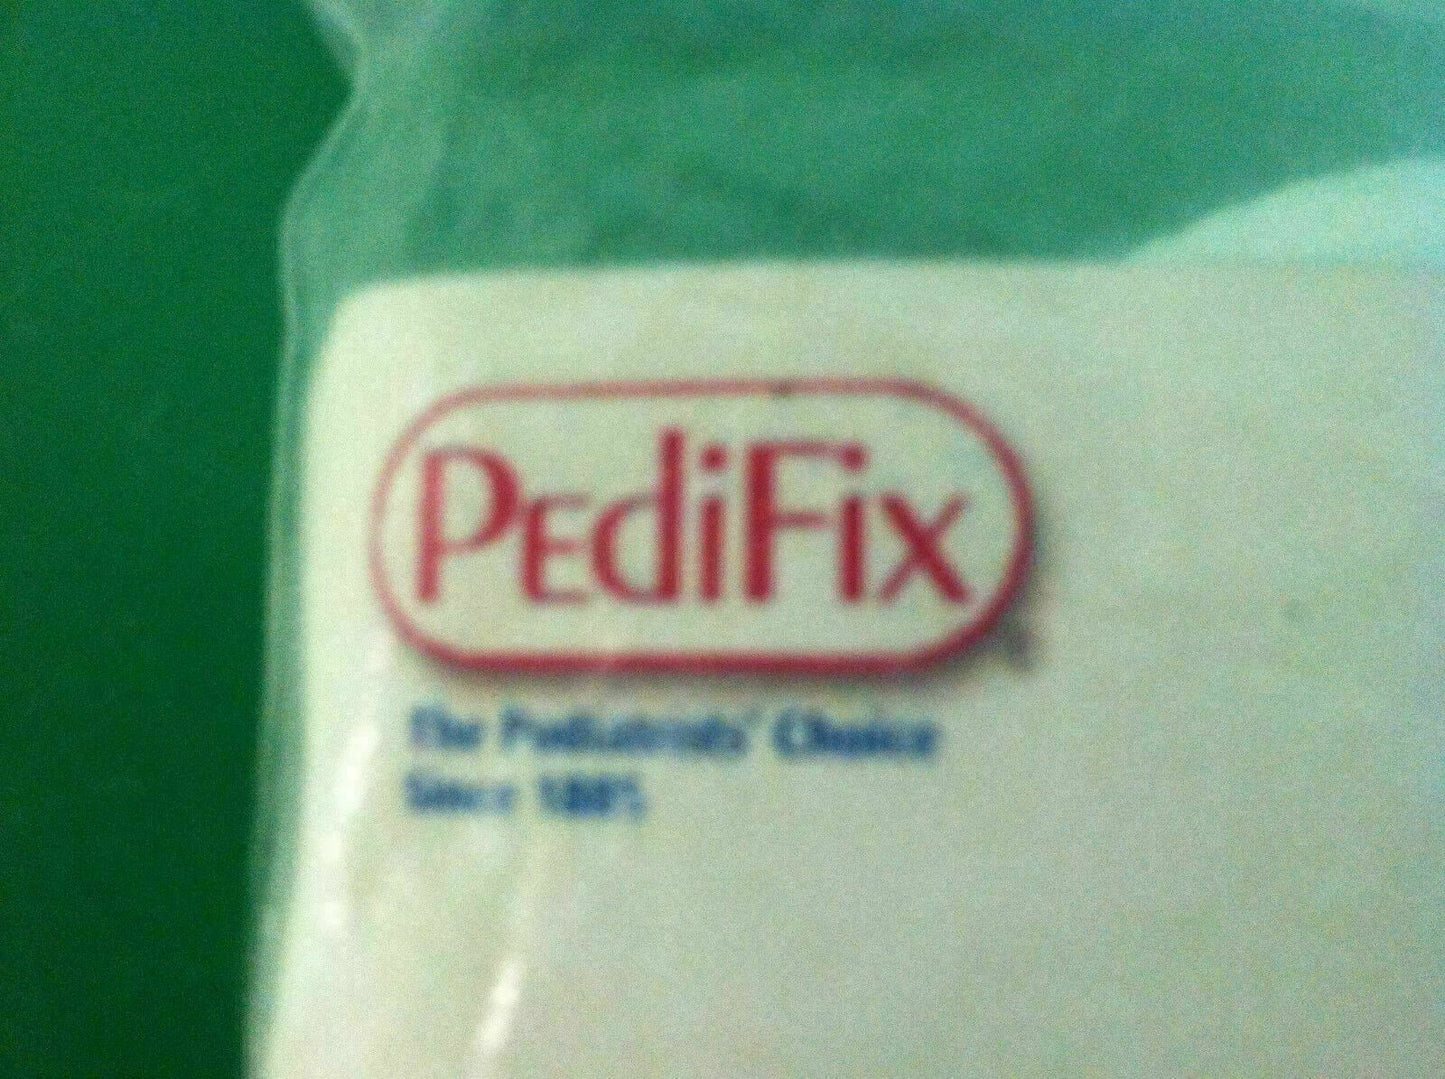 PediFix Seamless Everyday Socks for People With Sensitive Feet SIZE SMALL* #6839